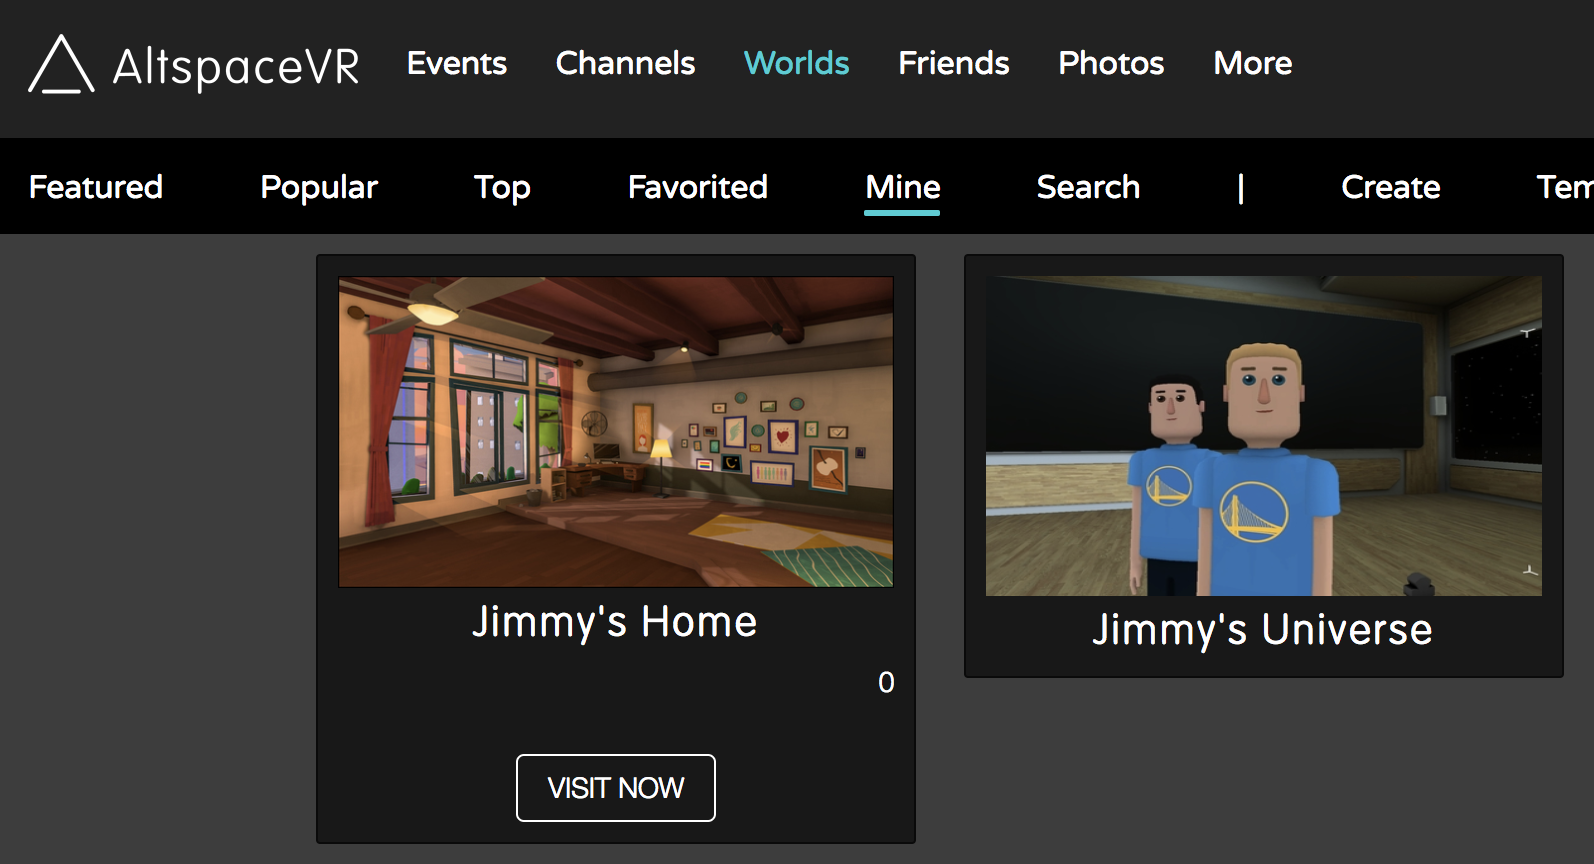 Worlds open in the AltspaceVR web view with Mine panel selected